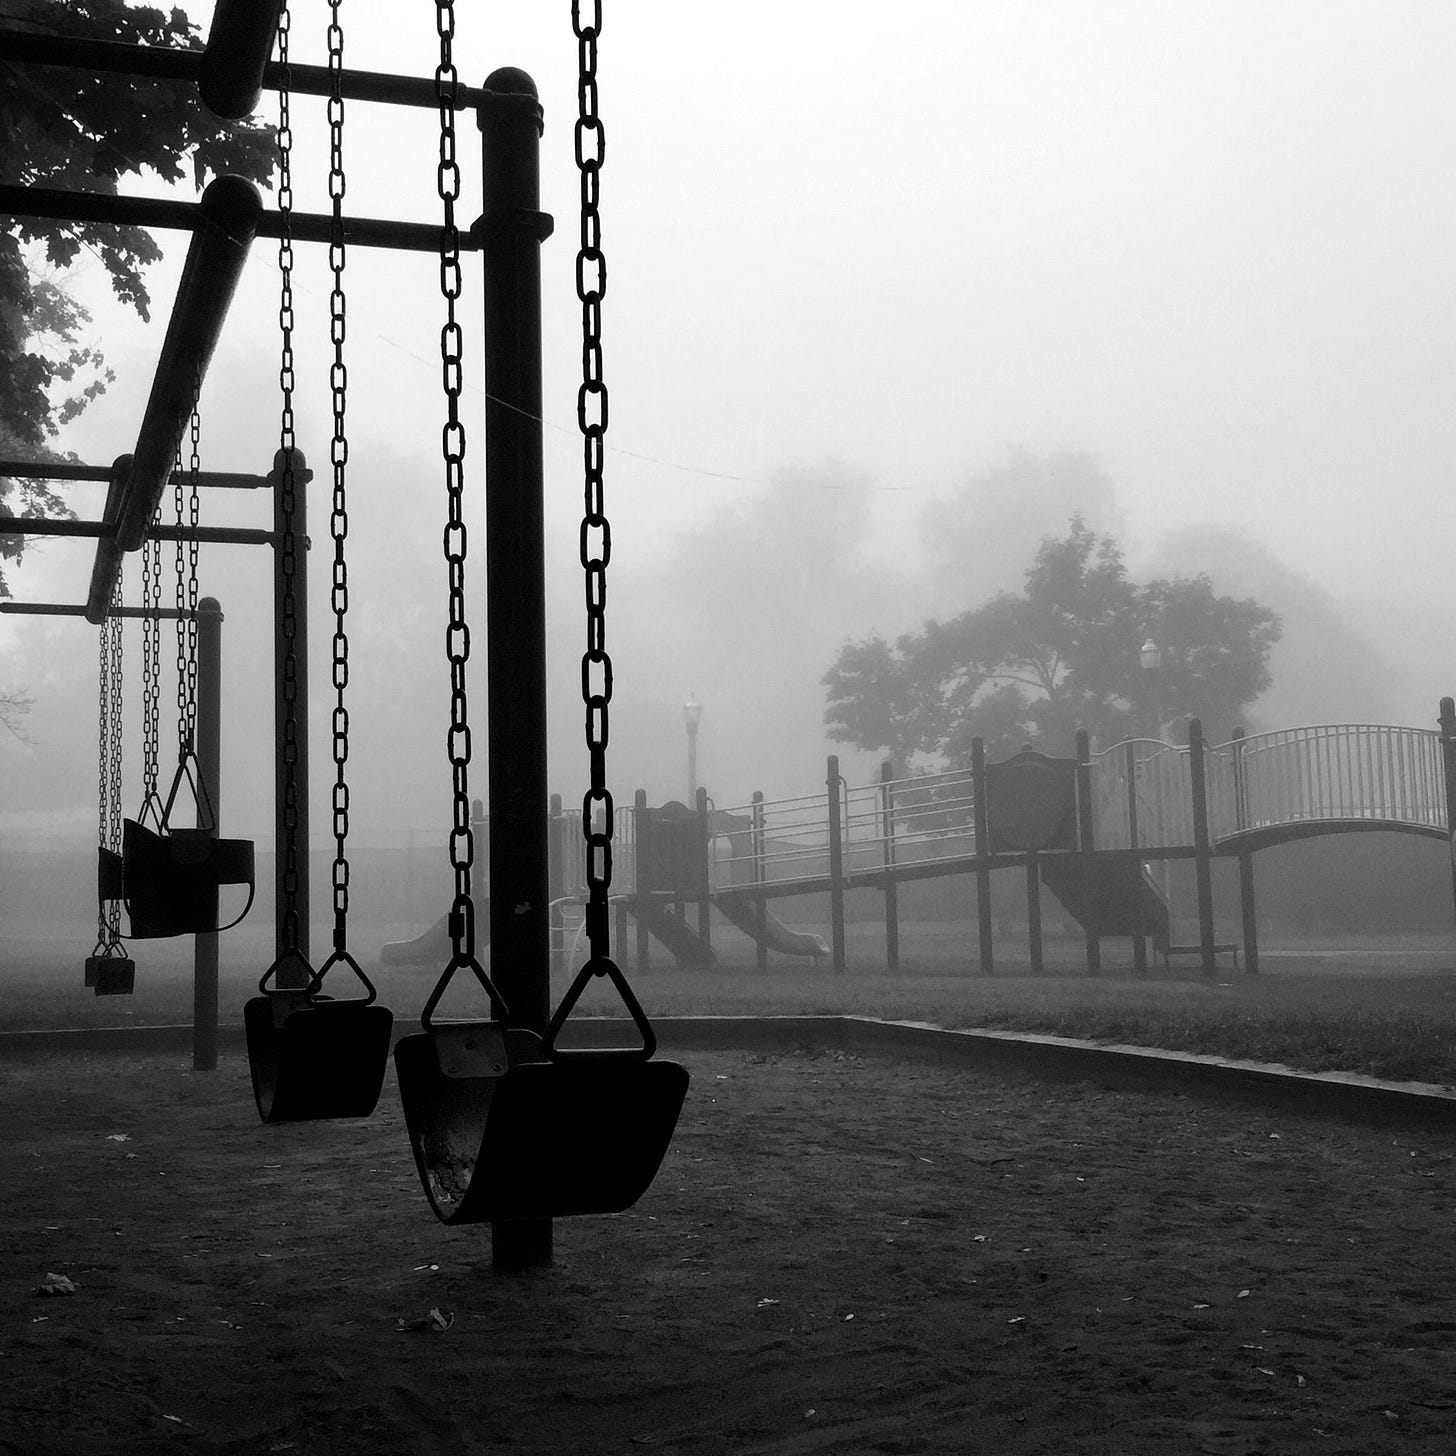 Photo by Robin McPherson of a creepy looking playground. No other dads though, thank goodness.